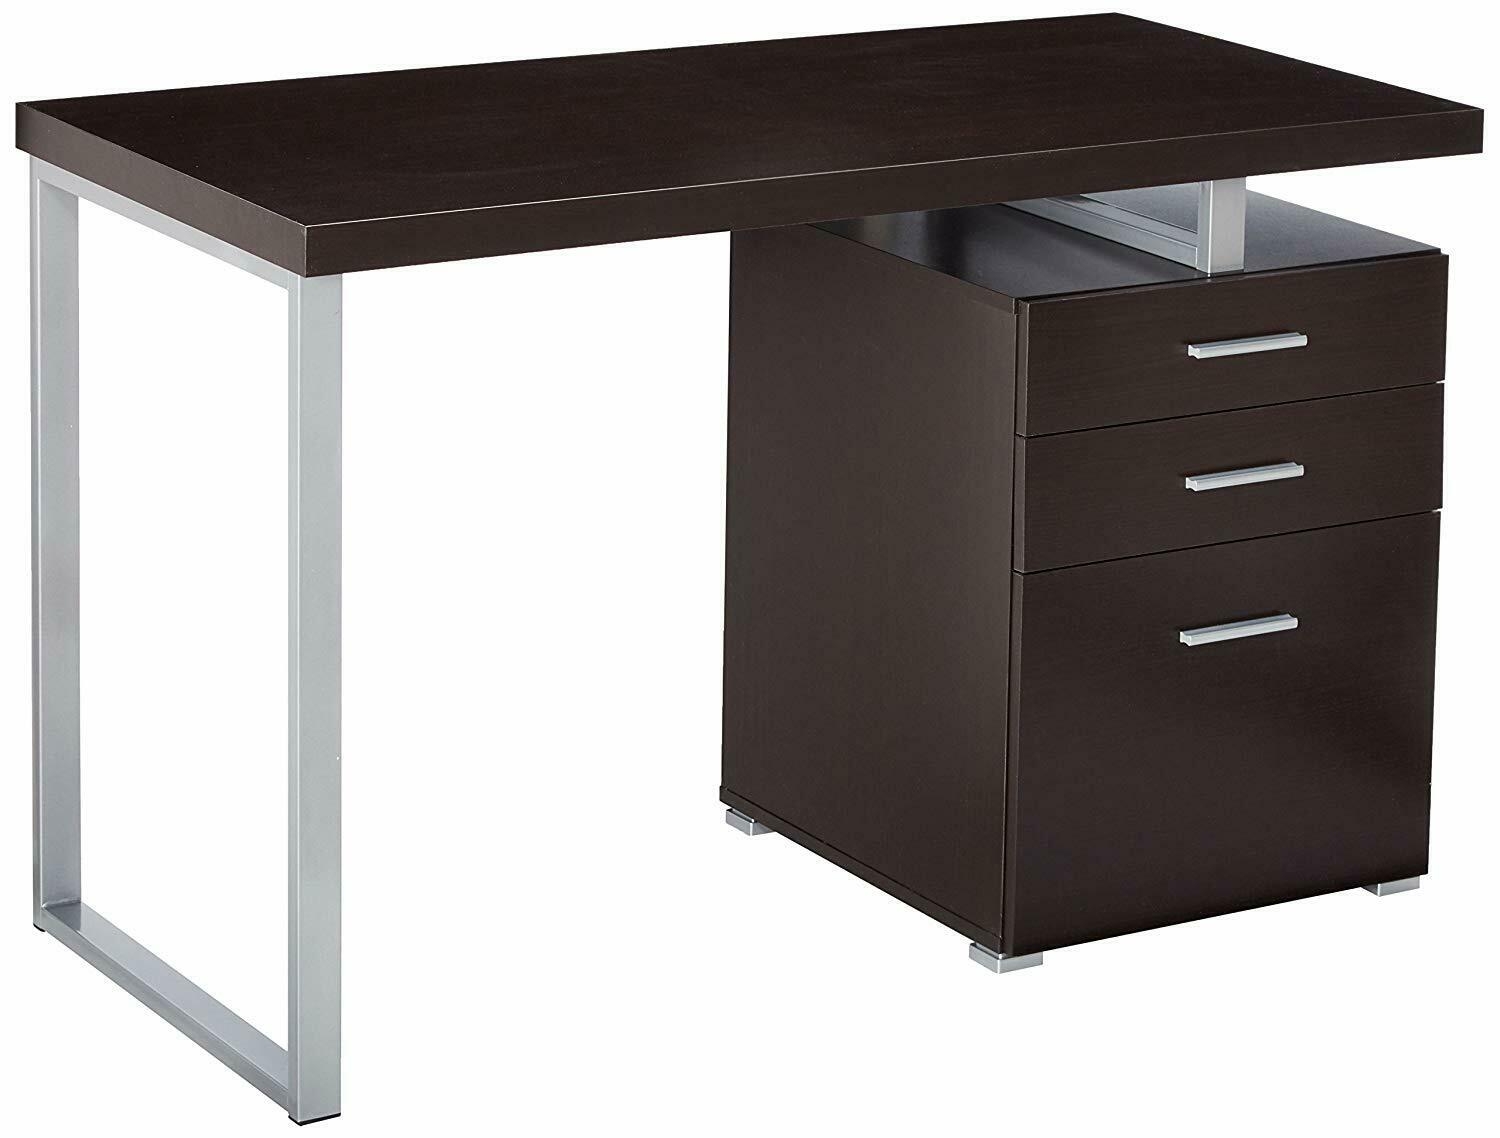 Small Desks With File Drawers Visualhunt, Small Corner Desk With Filing Cabinet